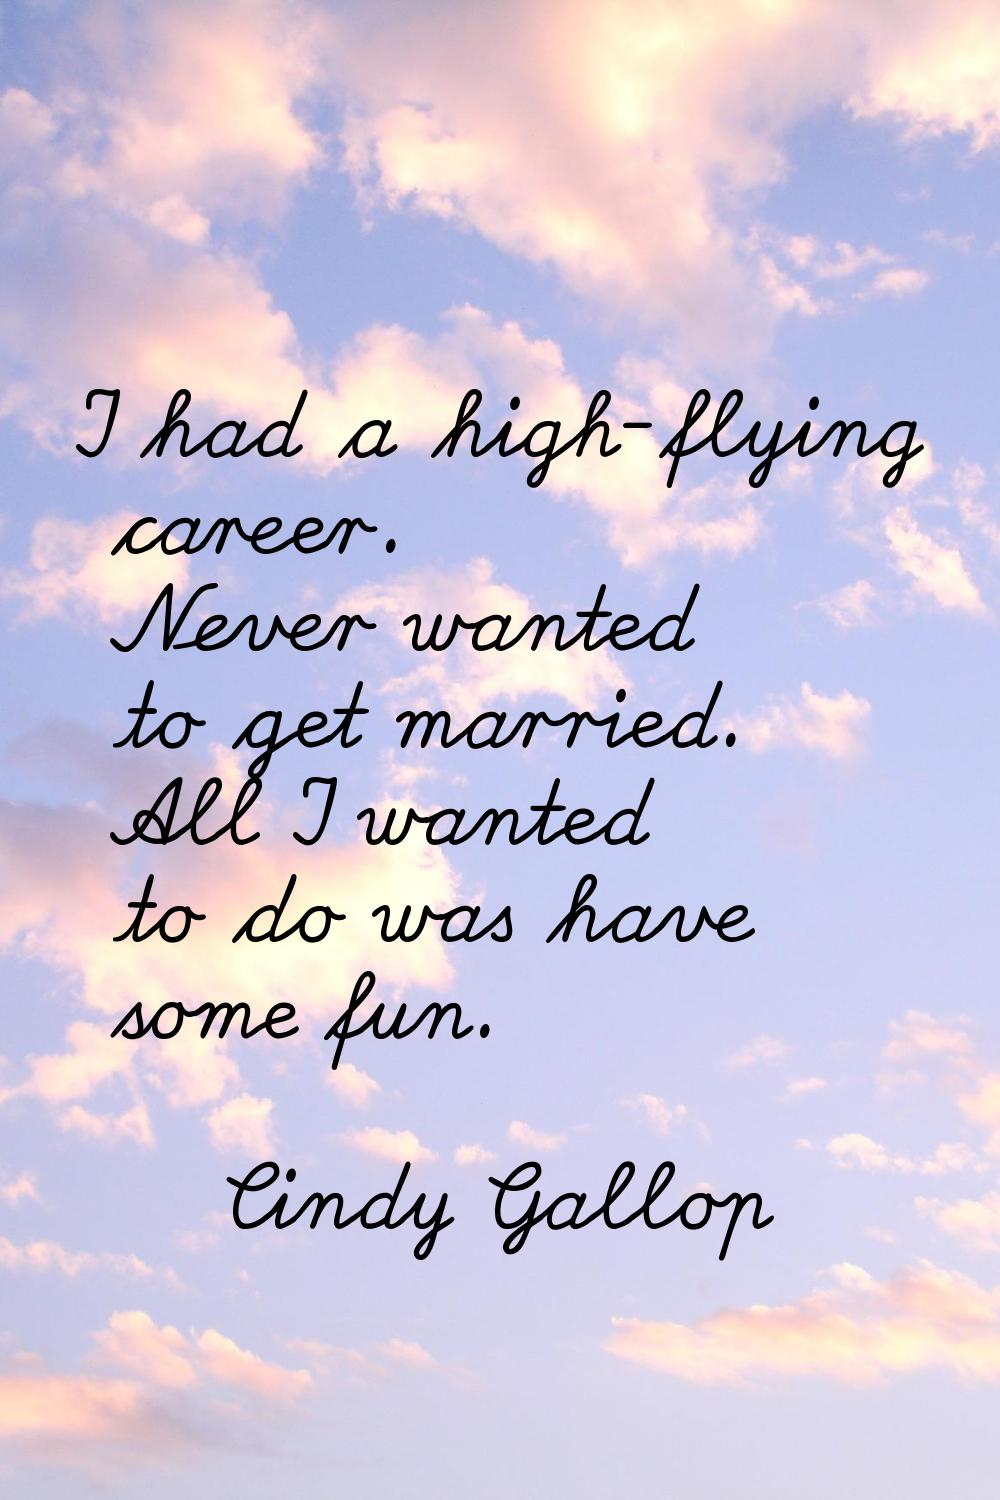 I had a high-flying career. Never wanted to get married. All I wanted to do was have some fun.